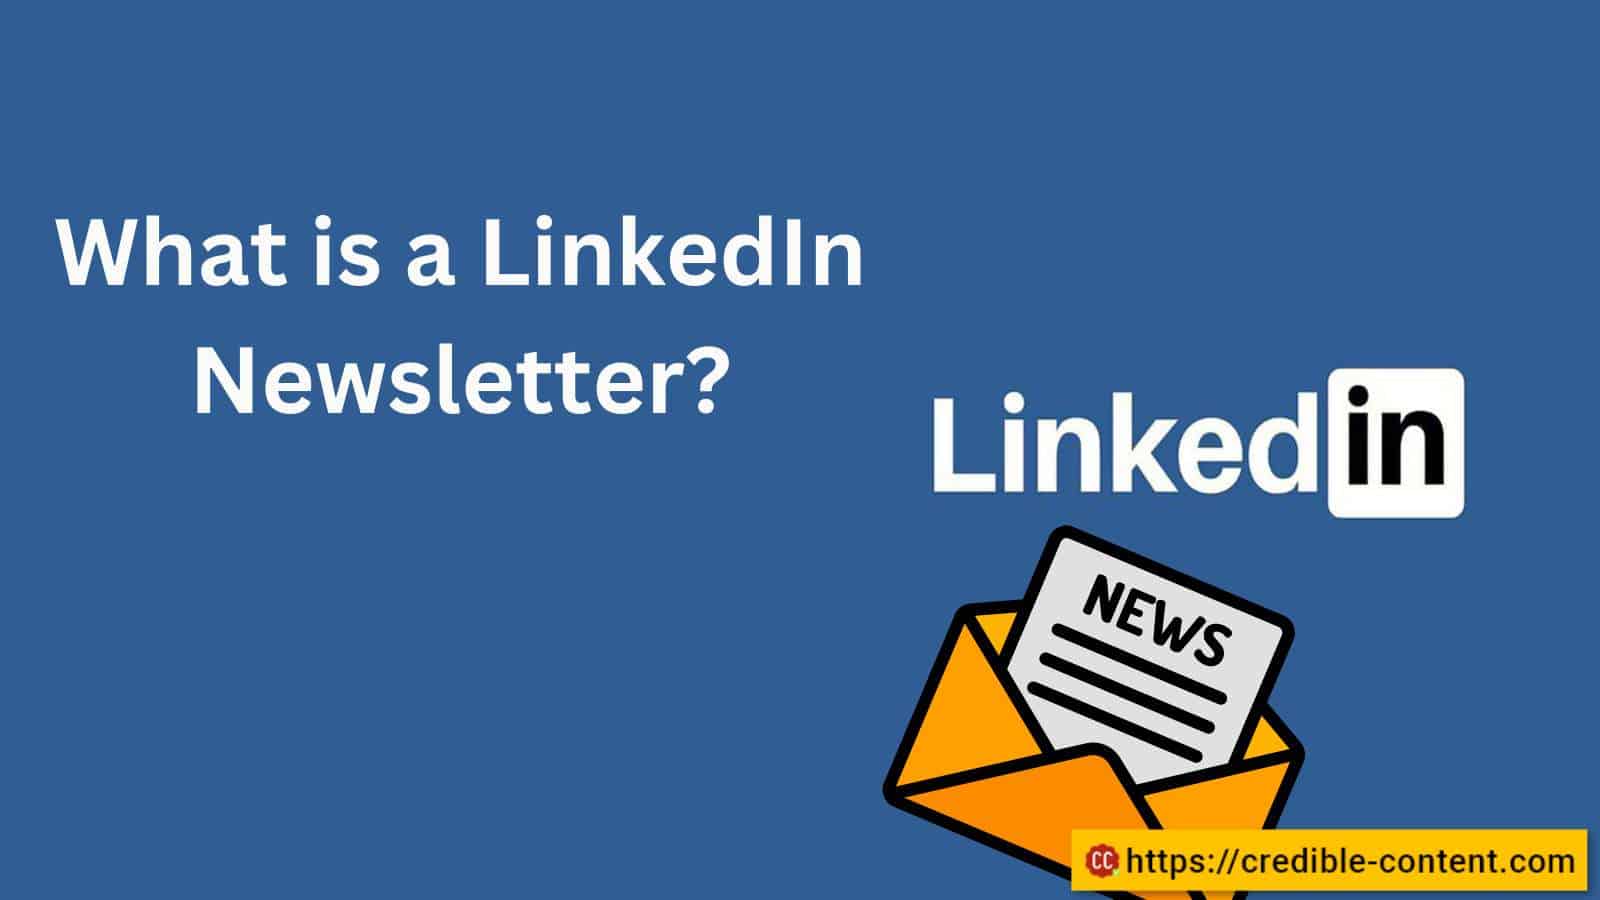 What is a LinkedIn Newsletter